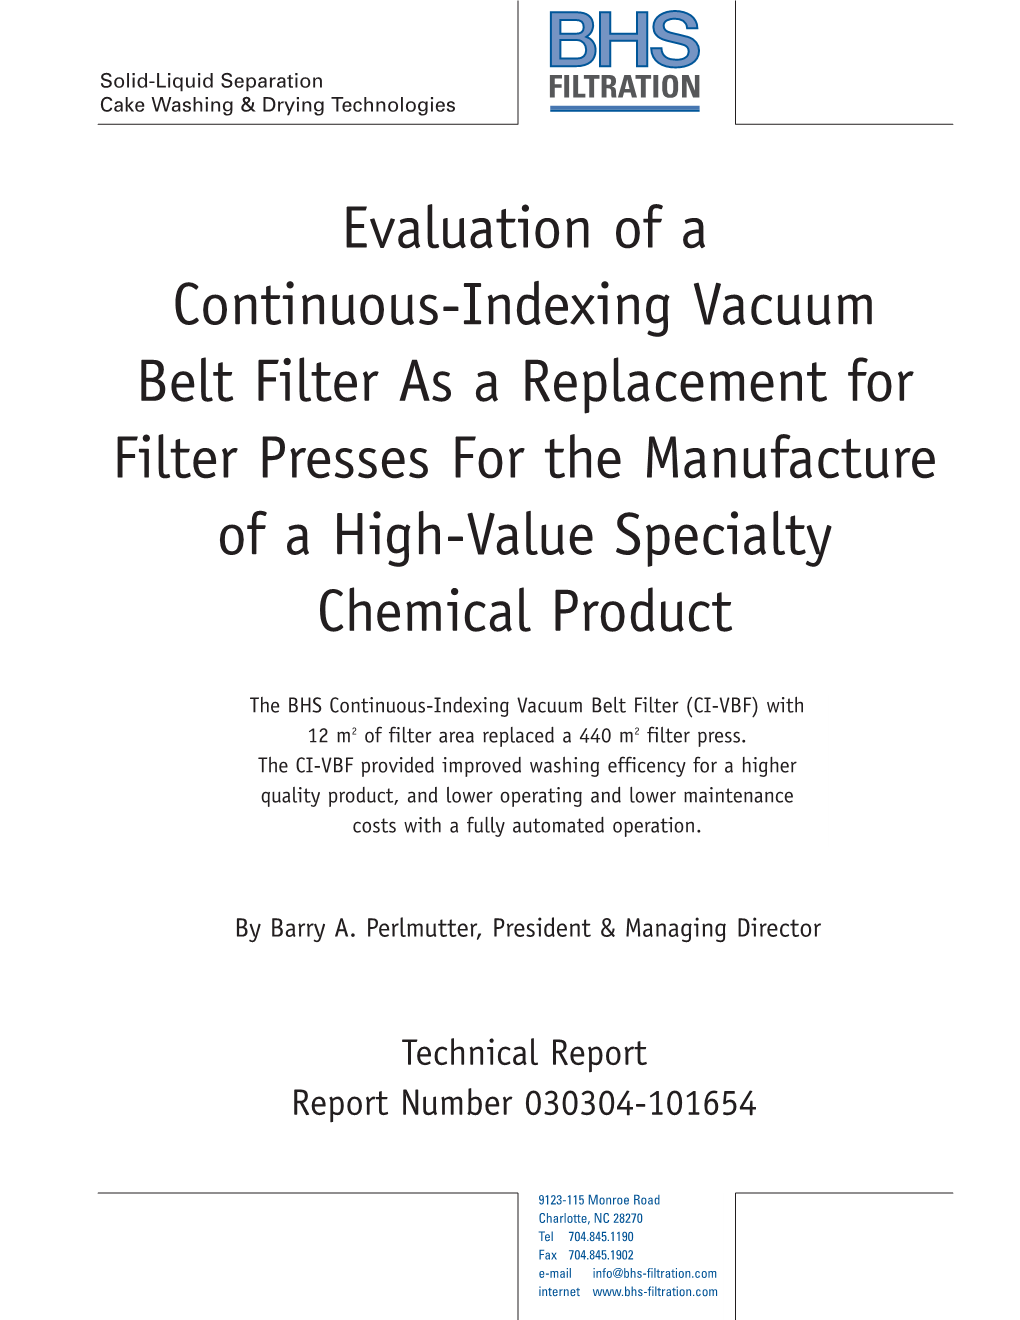 Evaluation of a Continuous-Indexing Vacuum Belt Filter As a Replacement for Filter Presses for the Manufacture of a High-Value Specialty Chemical Product